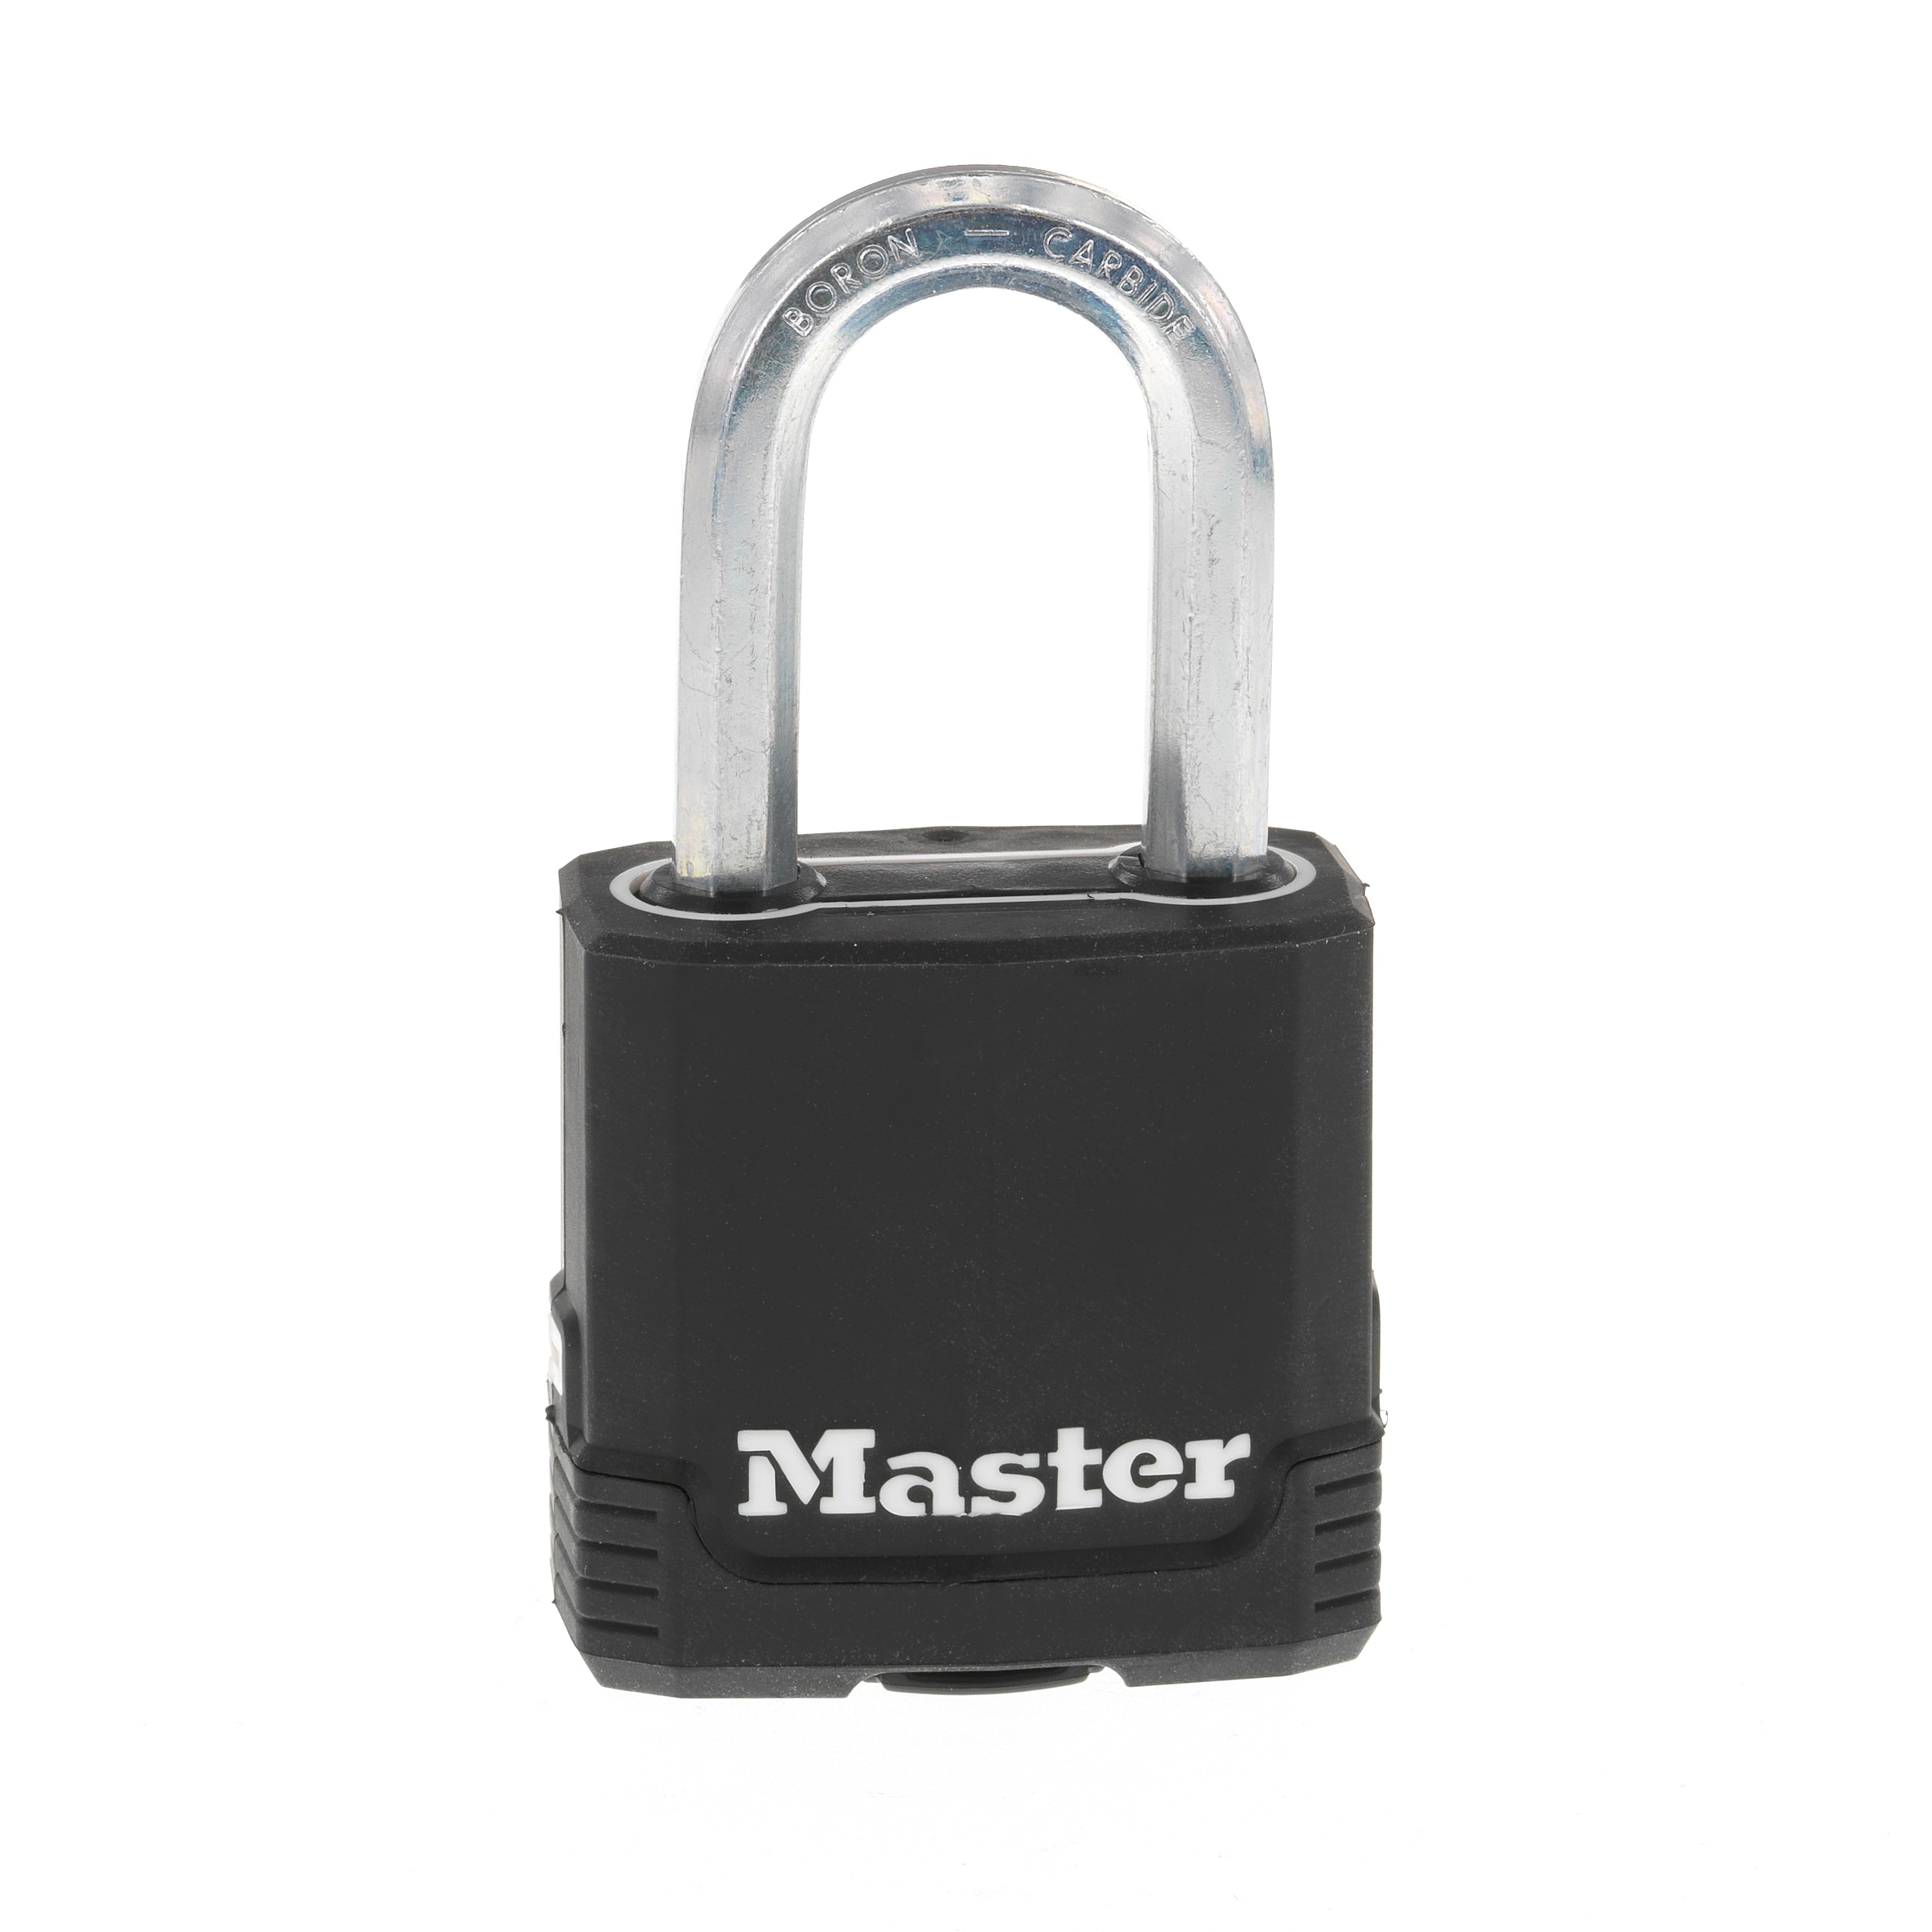 Master Lock Heavy Duty Outdoor Padlock with Key, 1-7/8 in. Wide, 1-1/2 in.  Shackle, 3 Pack M115XTRILFCCSEN - The Home Depot